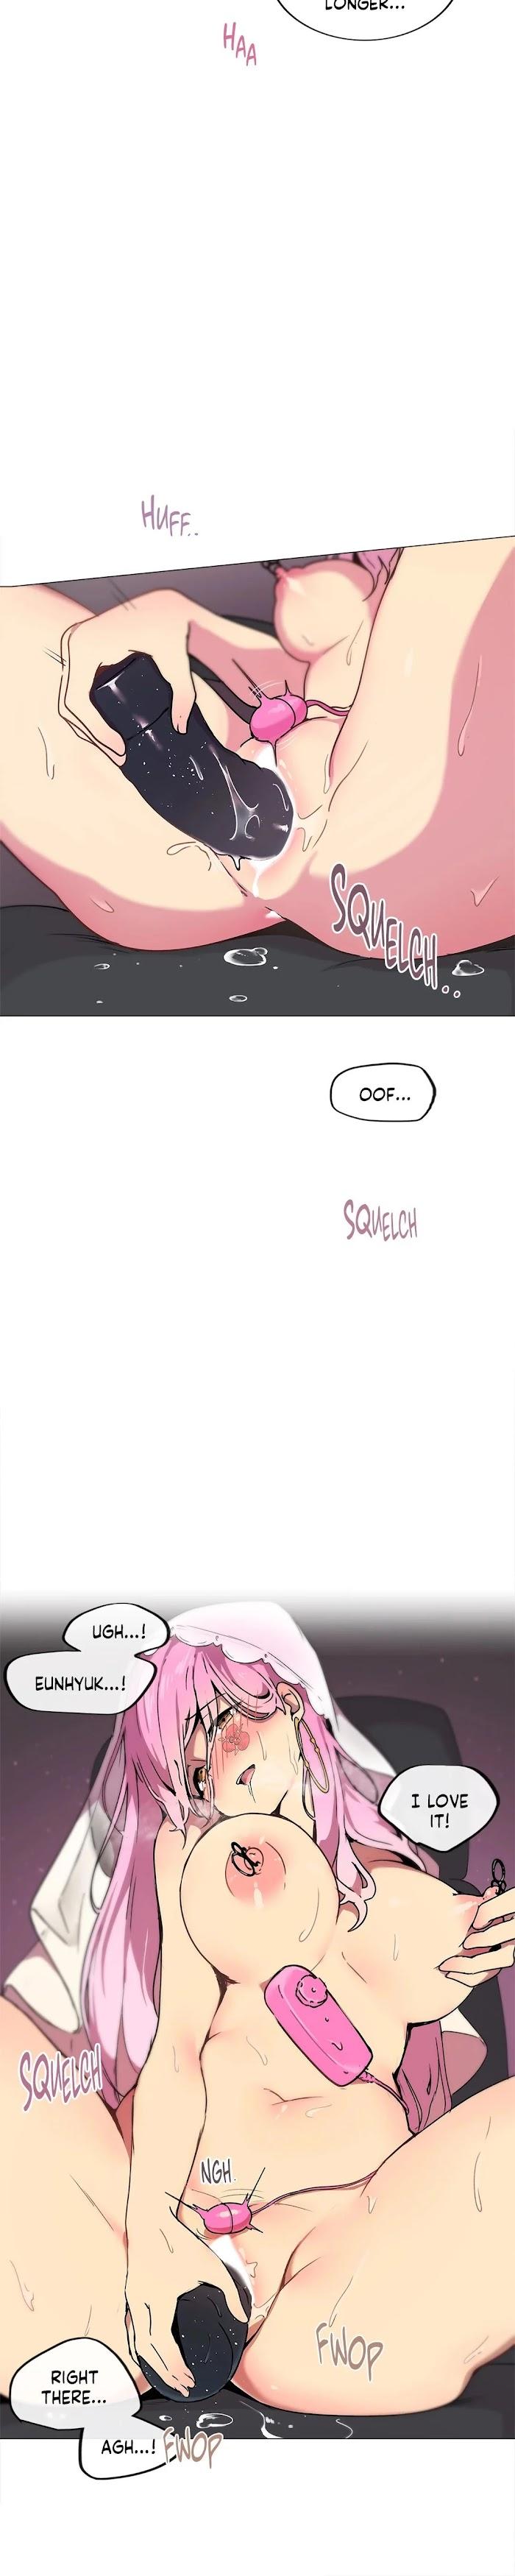 [Dumangoon, 130F] Sexcape Room: Wipe Out Ch.9/9 [English] [Manhwa PDF] Completed 167